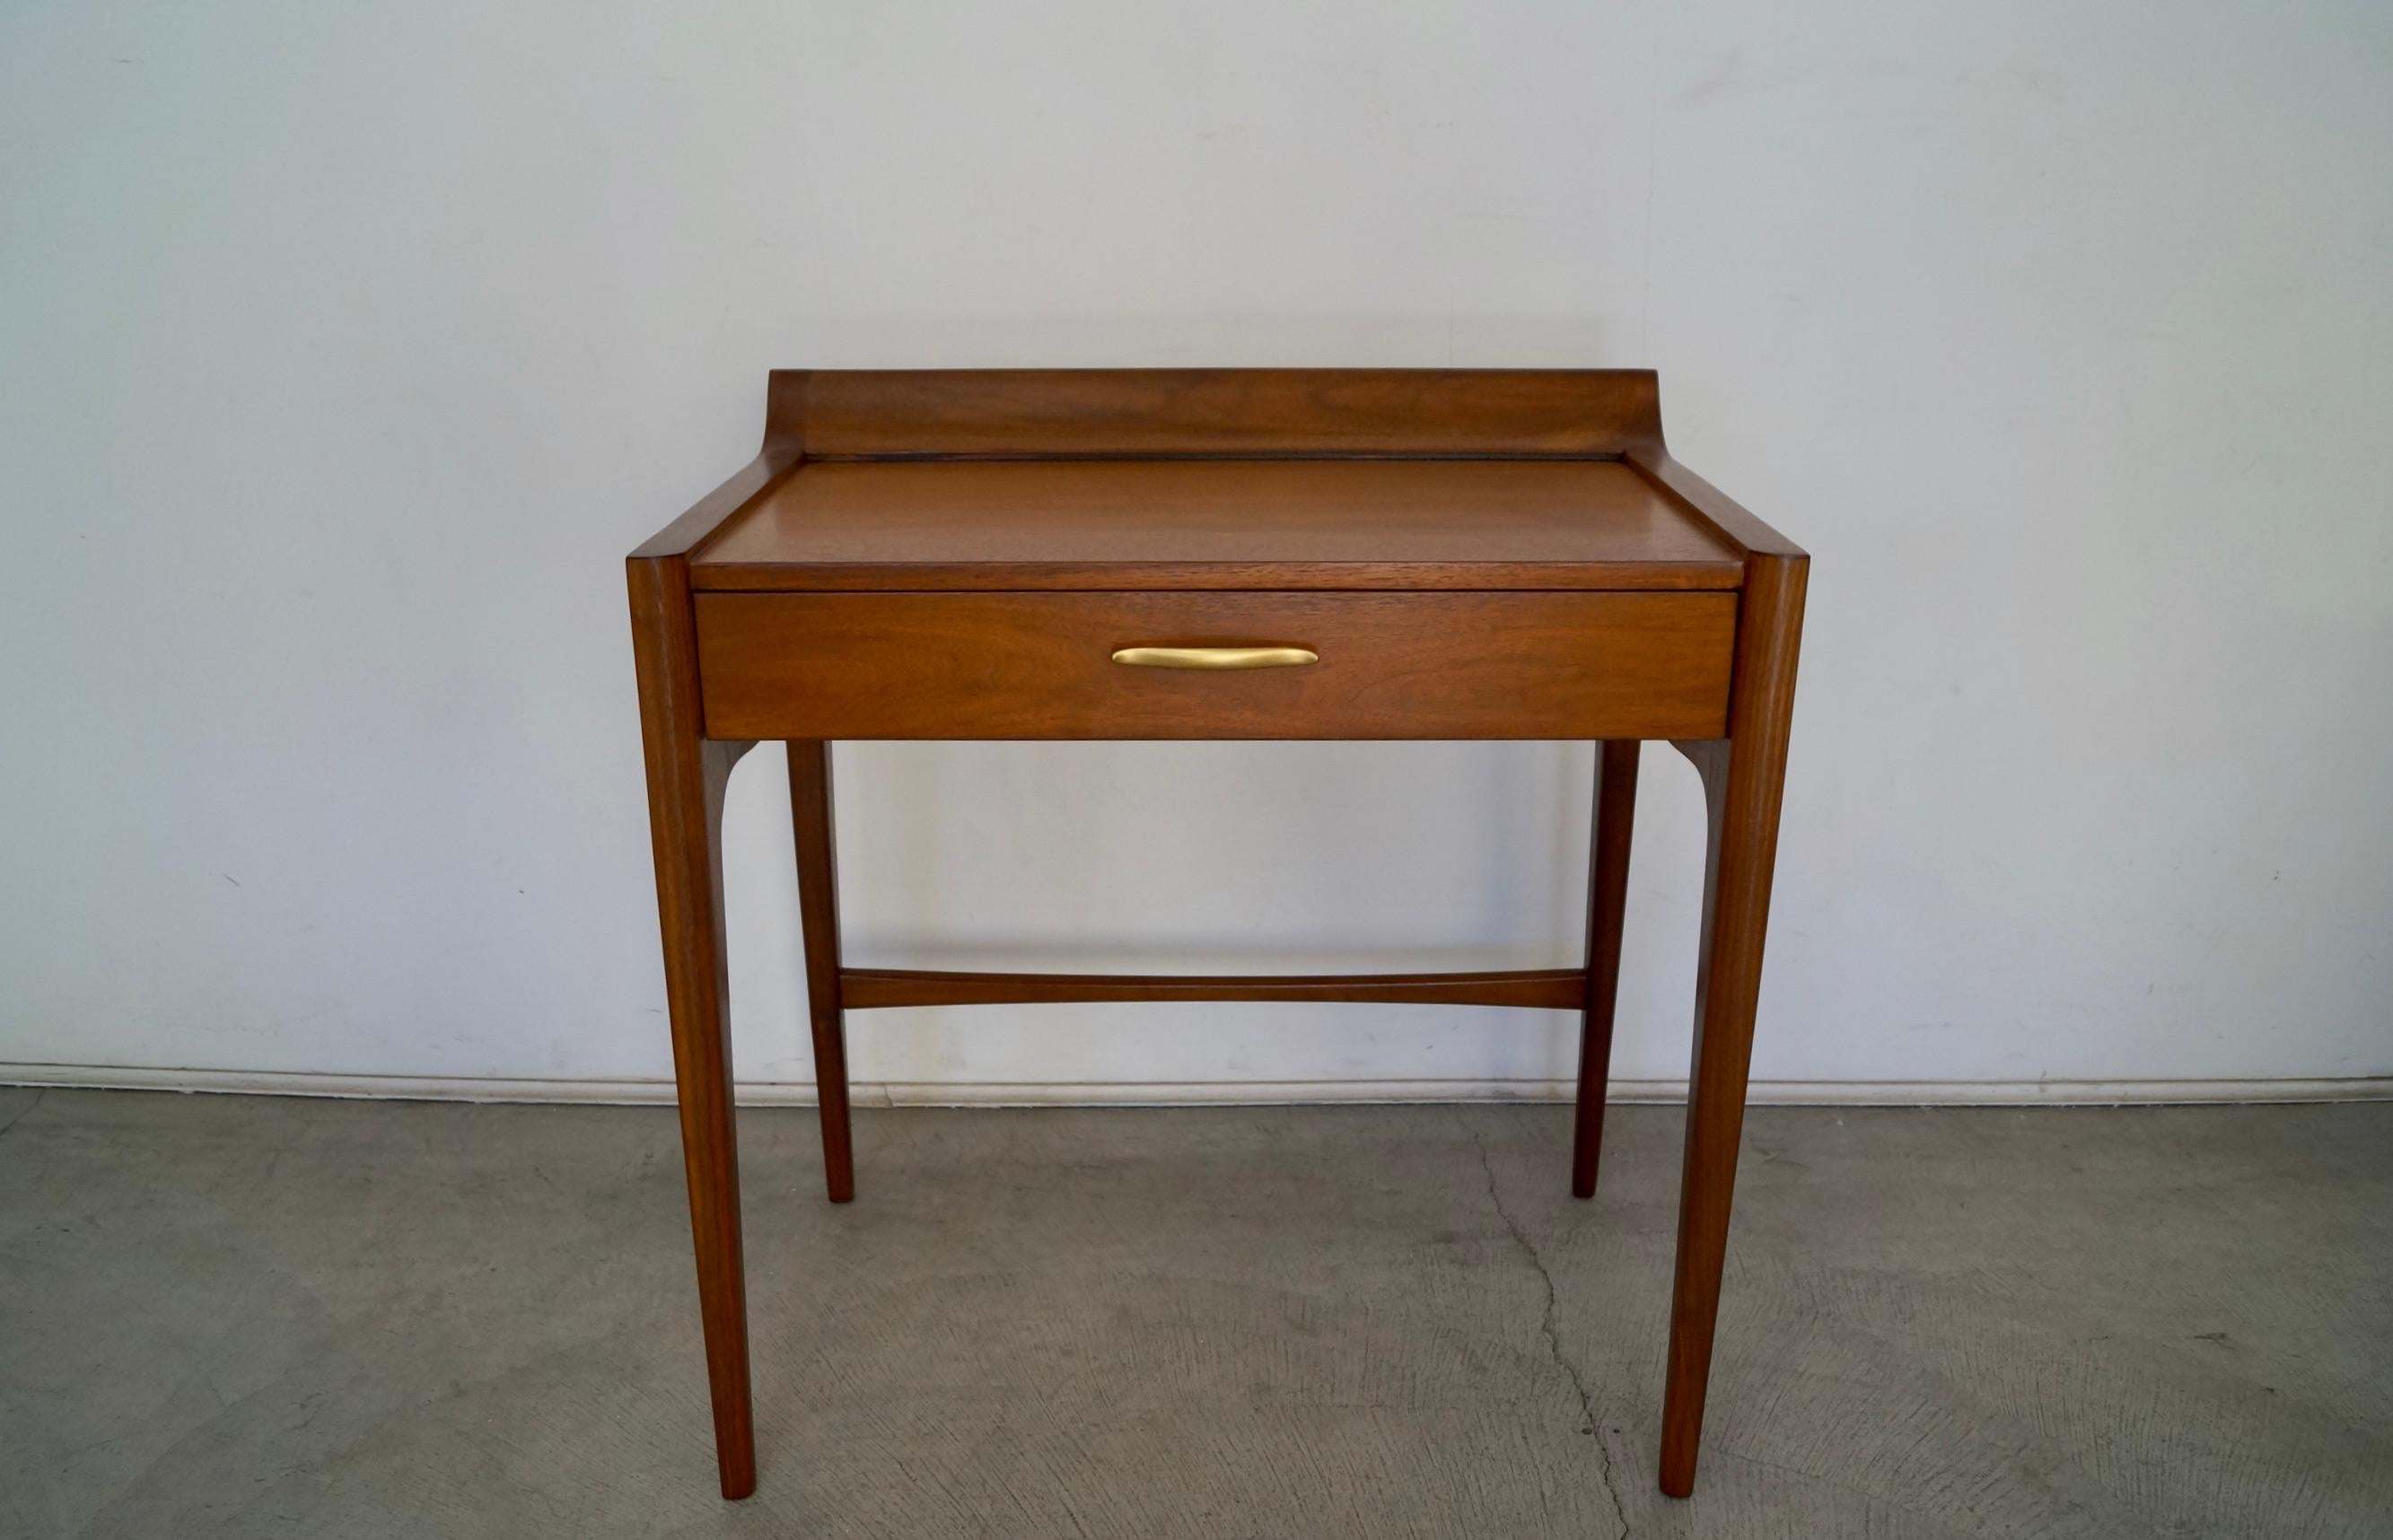 Vintage Mid-Century Modern vanity desk for sale. Designed by John Van Koert for Drexel in the 1950's, and part of the Profile series. This vanity desk is rare, and has been professionally refinished. It has a single drawer with the original pull